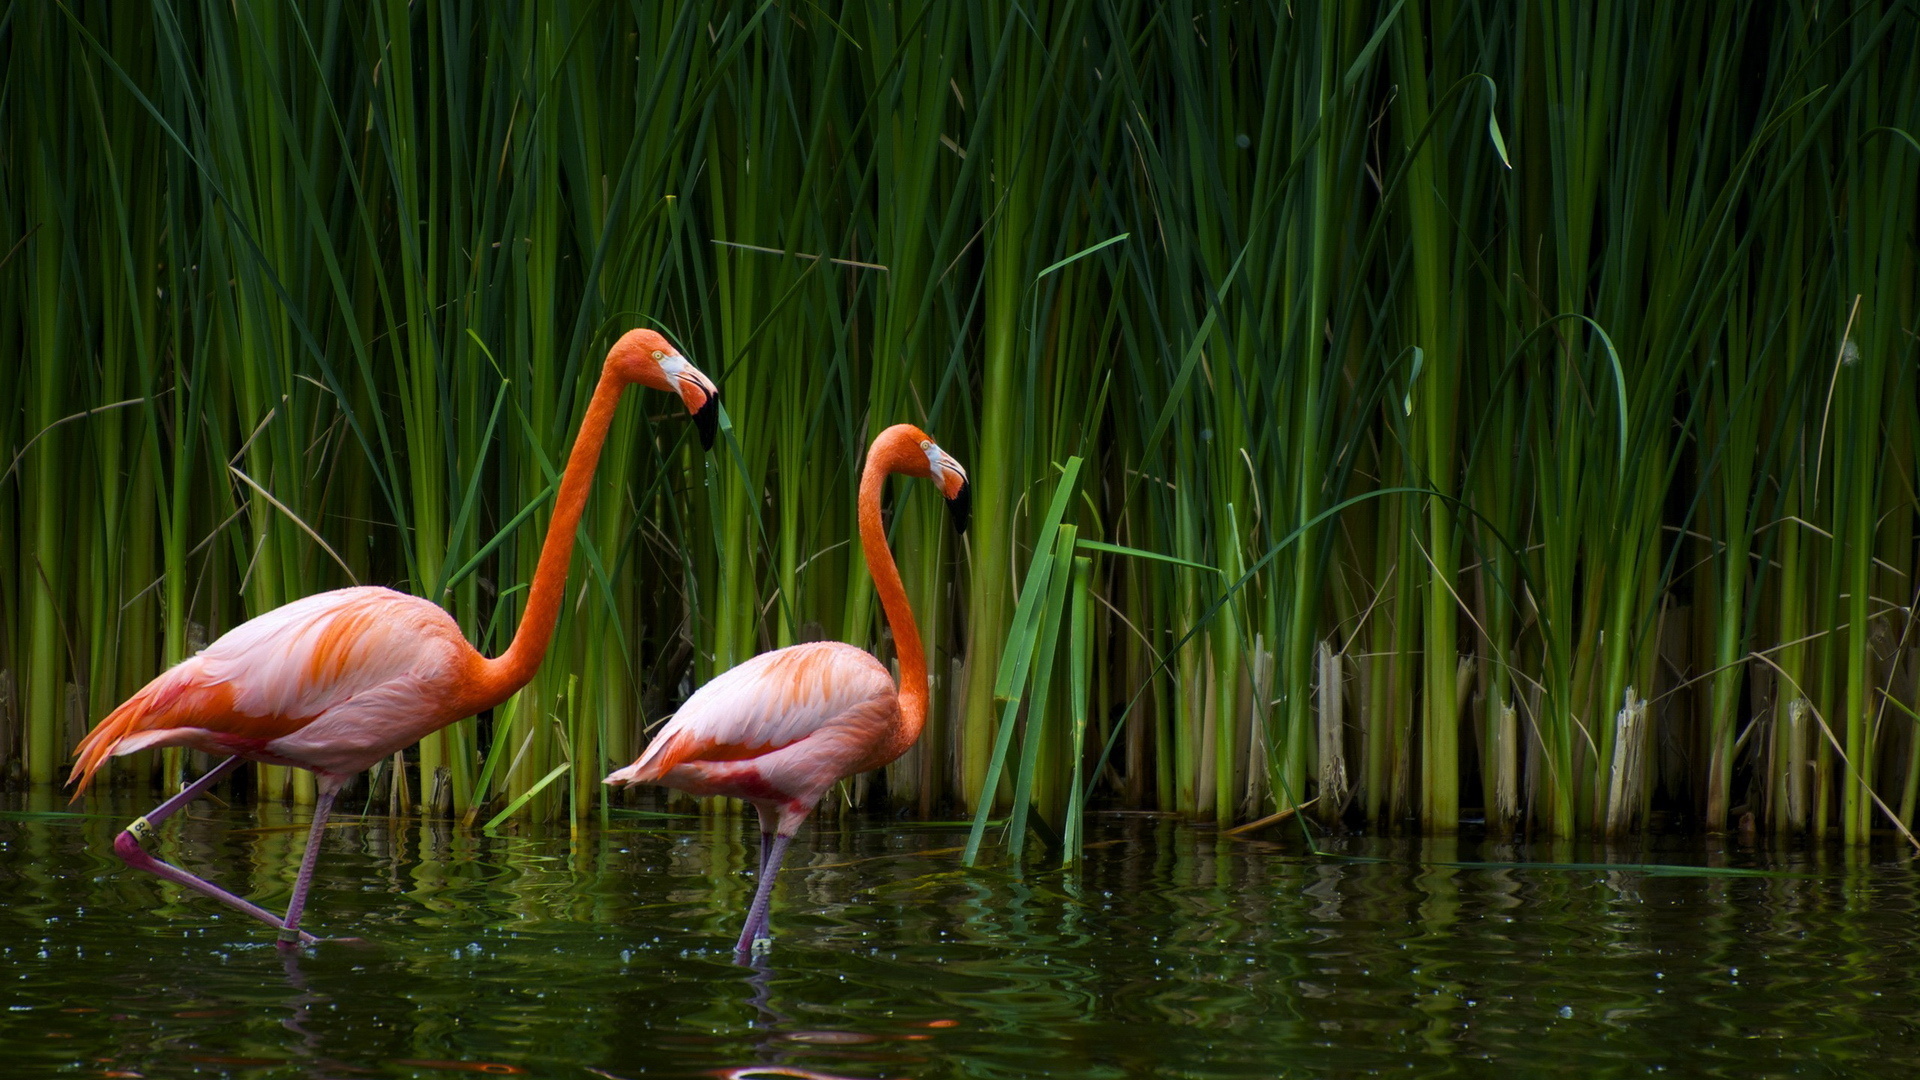 200+ Flamingo HD Wallpapers and Backgrounds